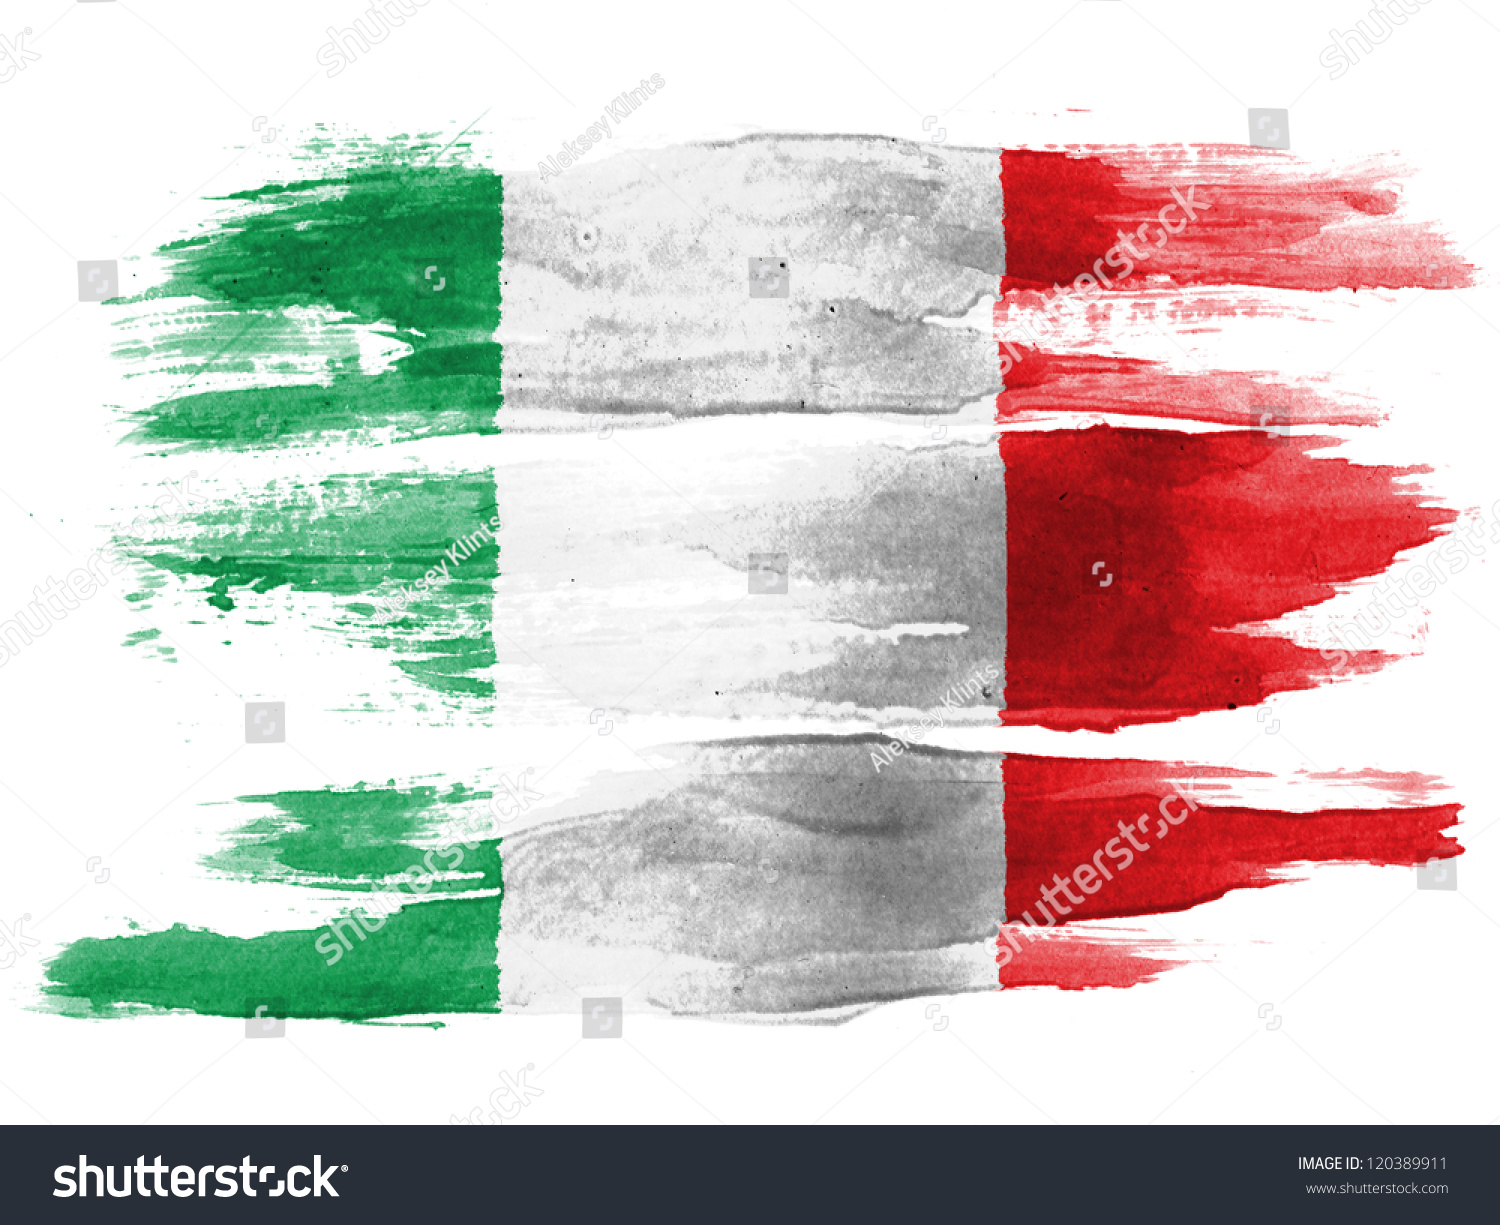 The Italian Flag Painted On White Paper With Watercolor Stock Photo ...